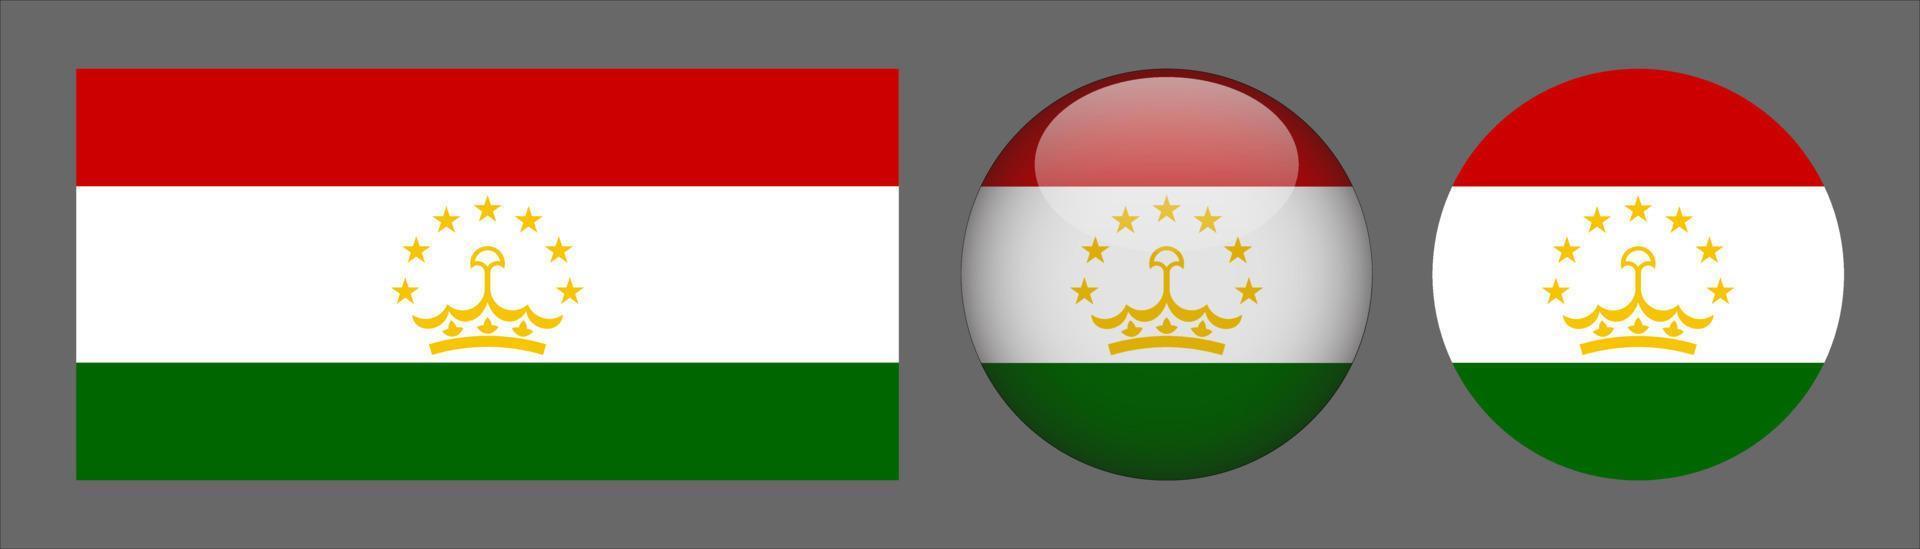 Tajikistan Flag Set Collection, Original Size Ratio, 3D Rounded and Flat Rounded. vector